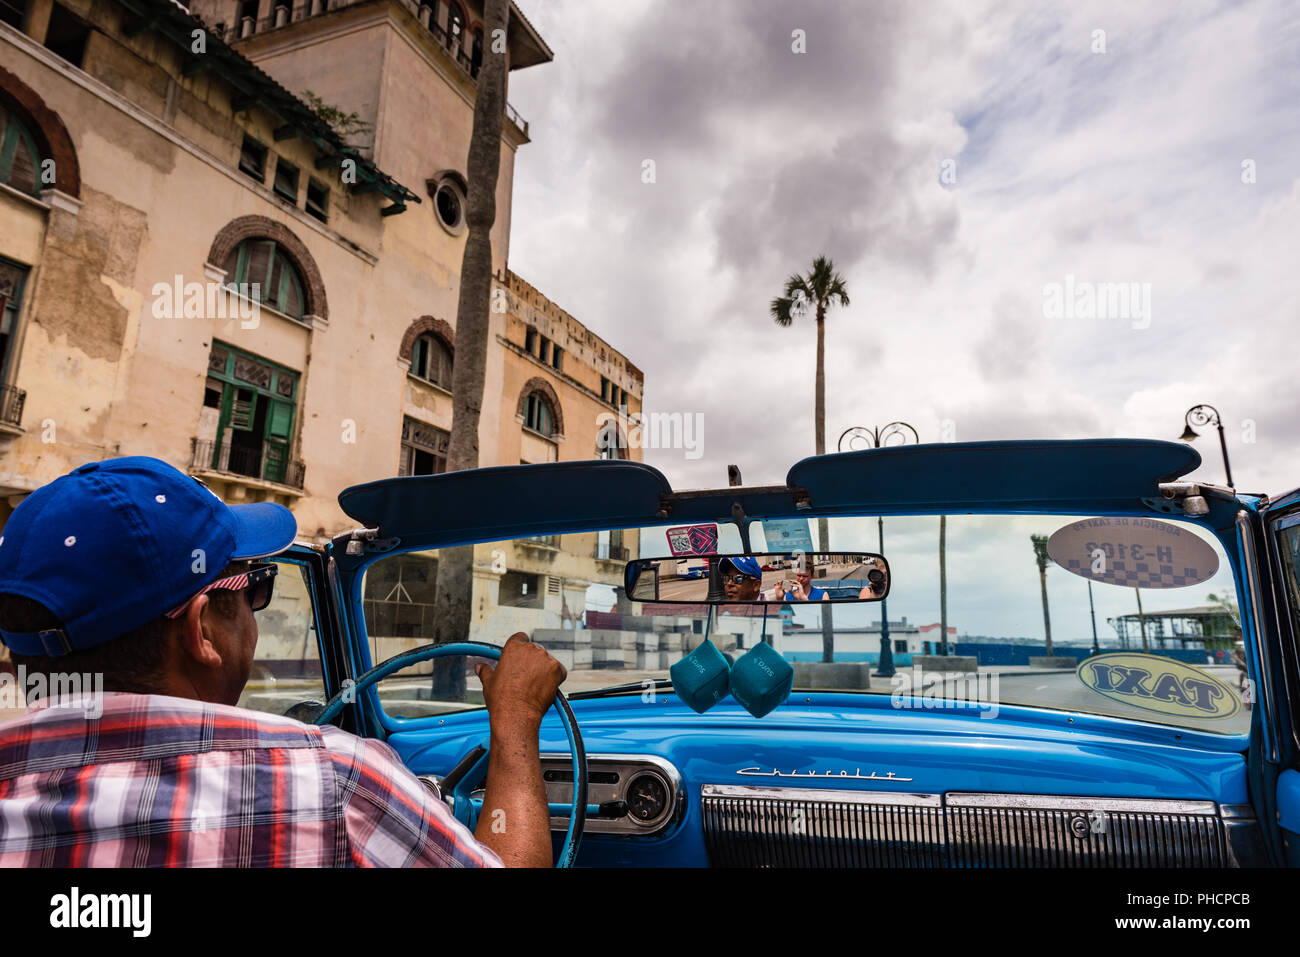 Havana, Cuba / March 22, 2016: Cuban man drives blue vintage convertible taxi under gray skies  through streets lined with Colonial architecture. Stock Photo